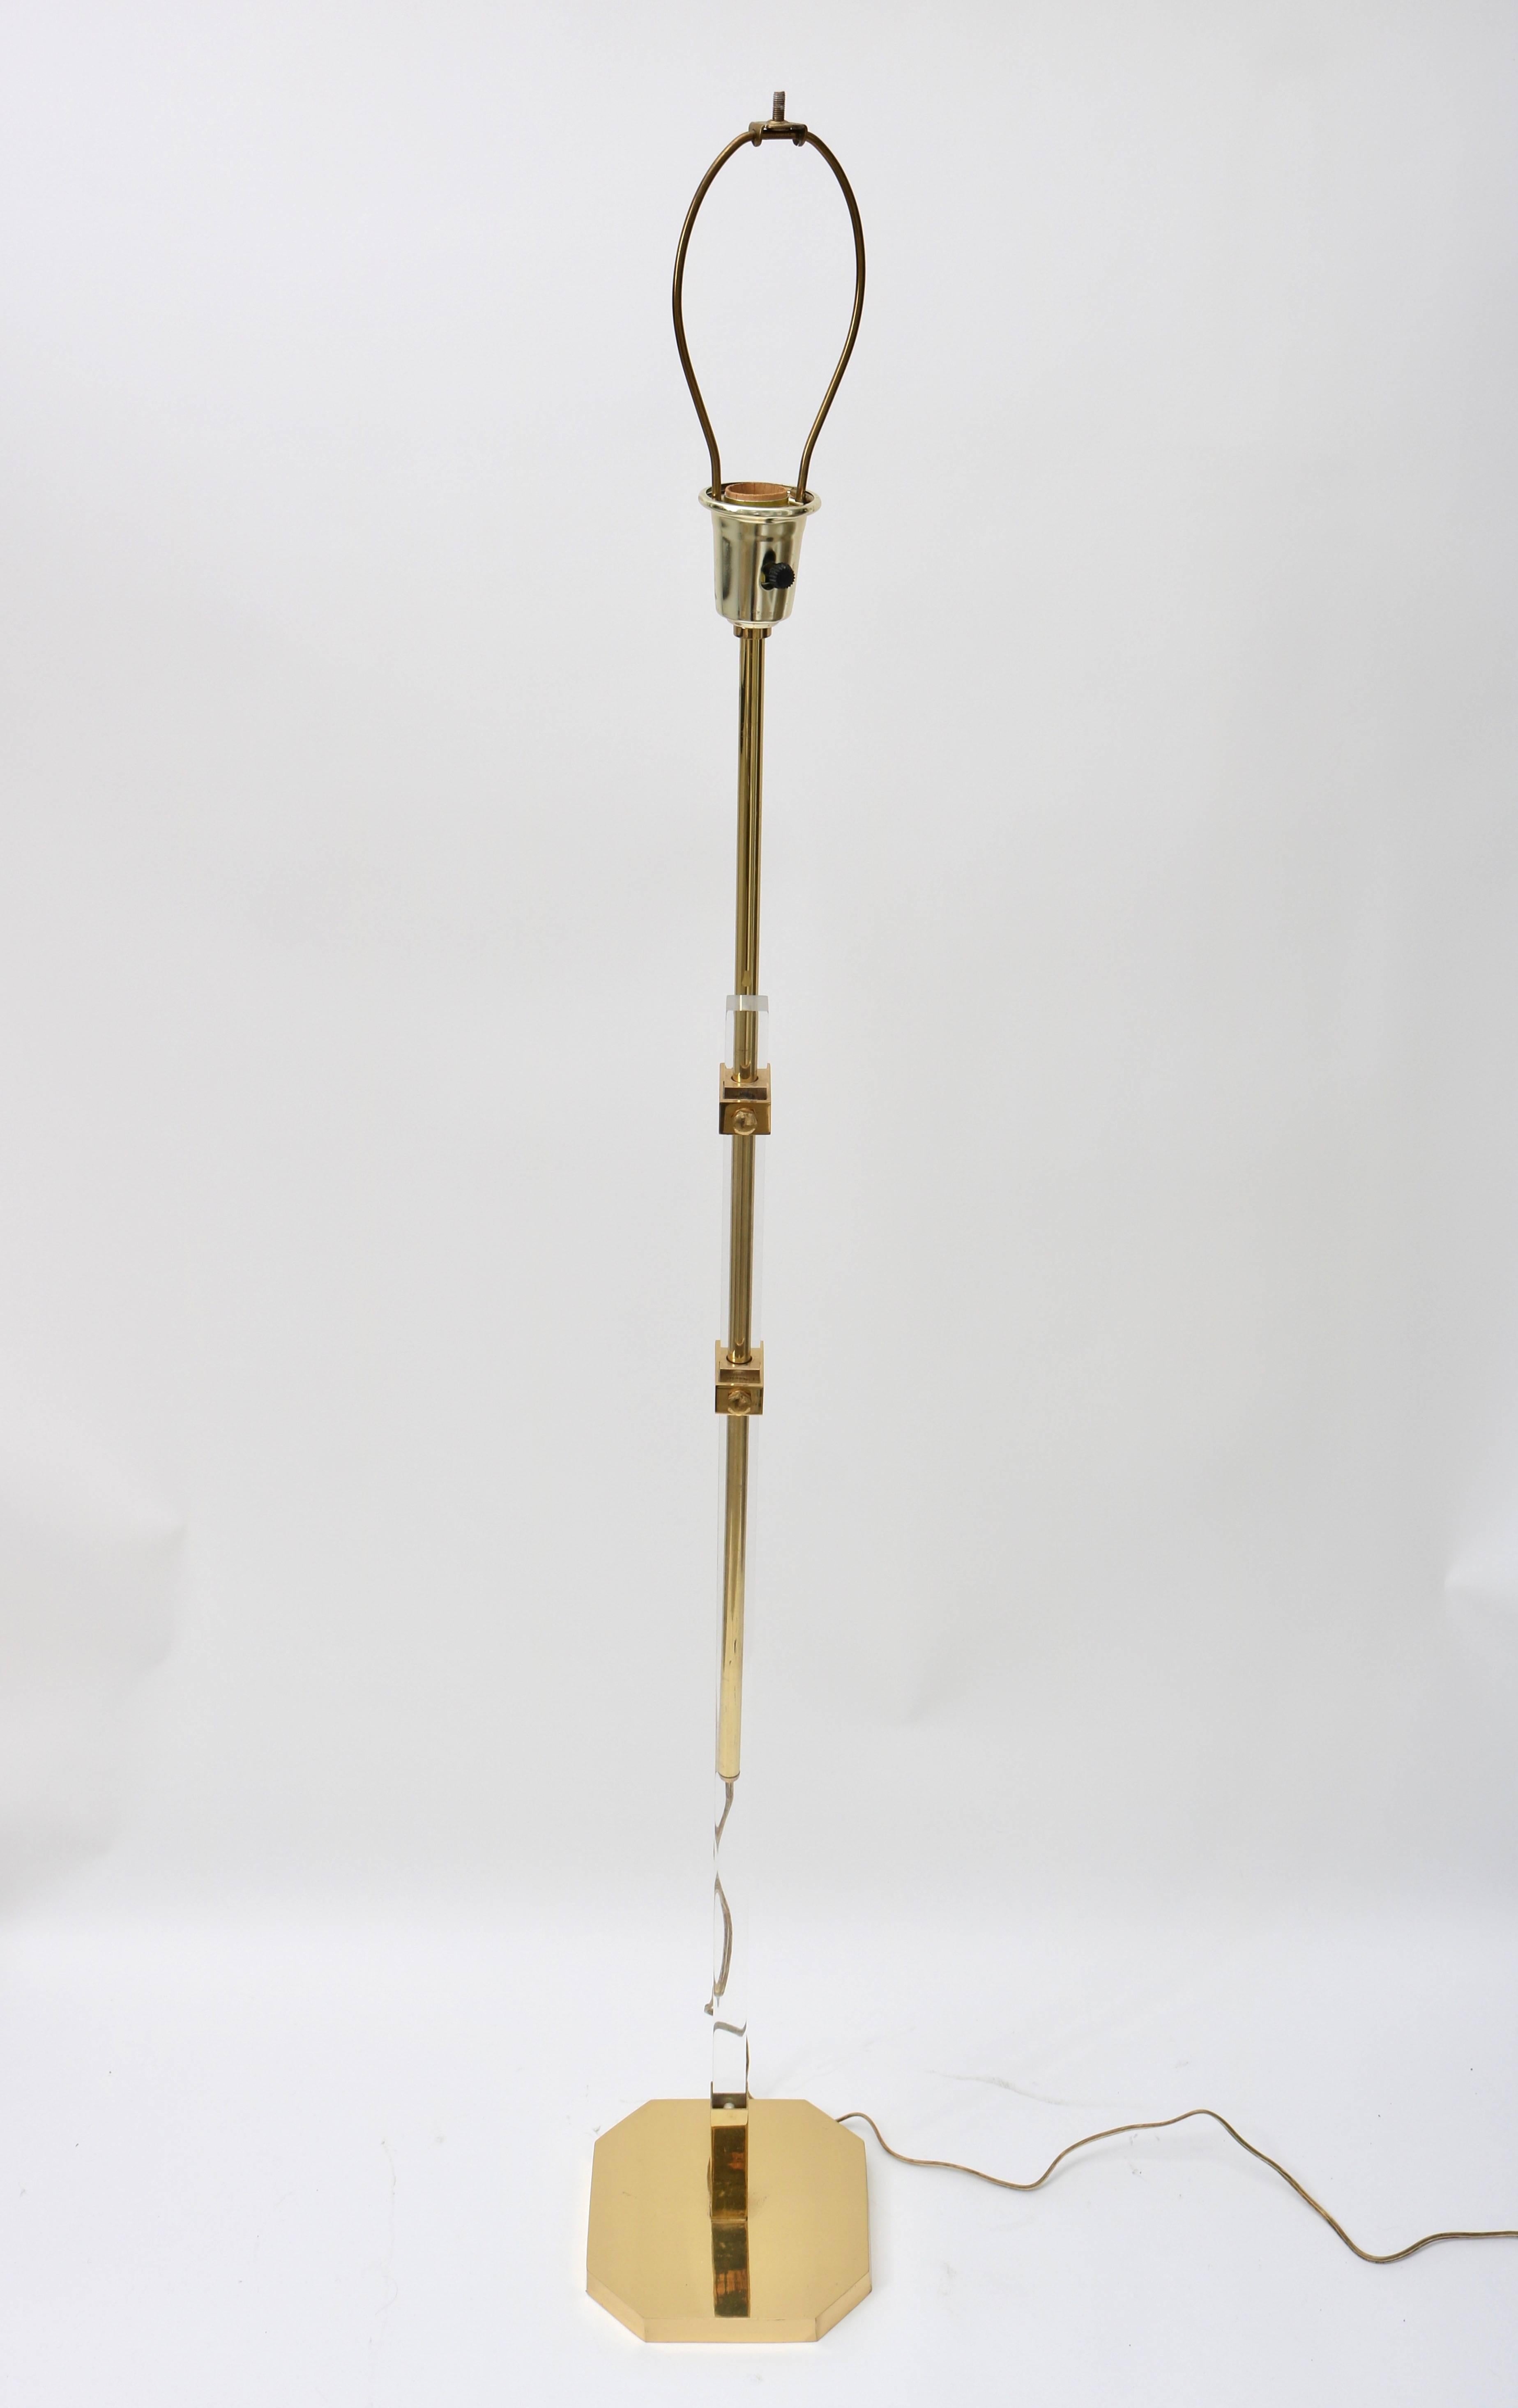 
This stylish adjustable floor lamp is very much in the style and quality of pieces designed and created by Charles Hollis Jones in the 1970s and 1980s. We have listed the metal as polished brass but it has a polished gold-plate look and quality to